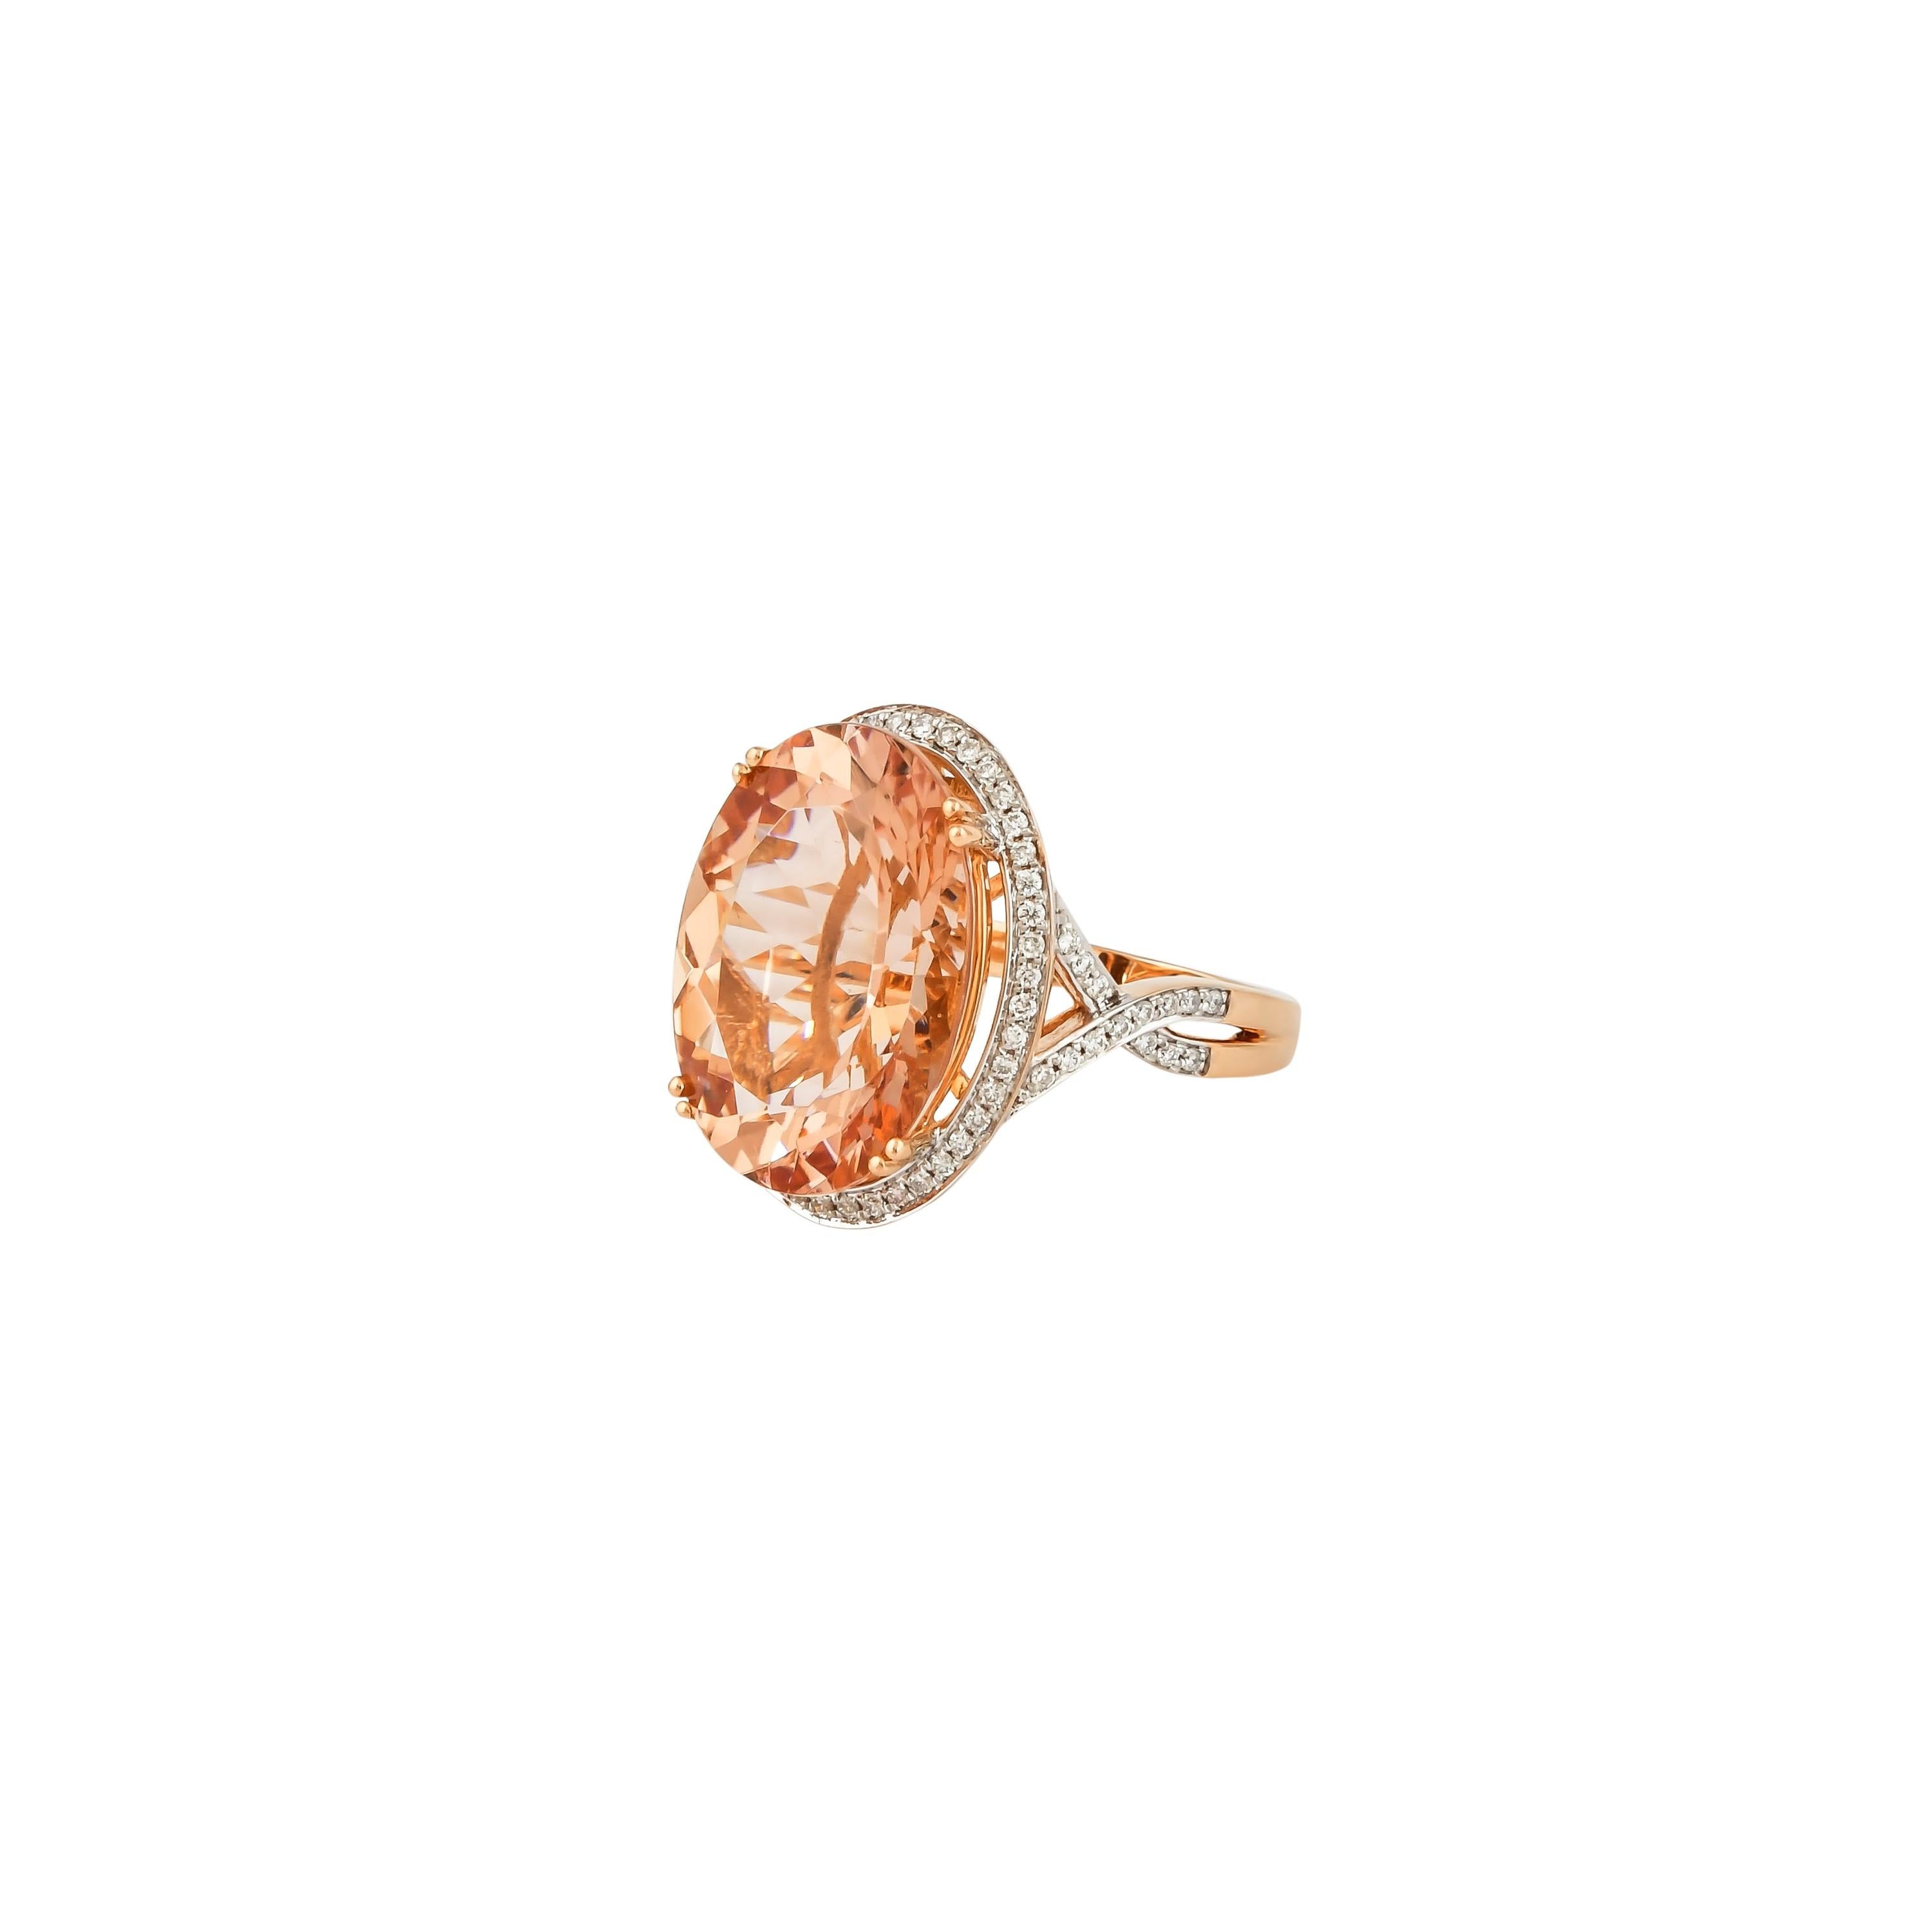 Oval Cut 10.91 Carat Morganite and White Diamond Ring in 18 Karat Rose Gold For Sale